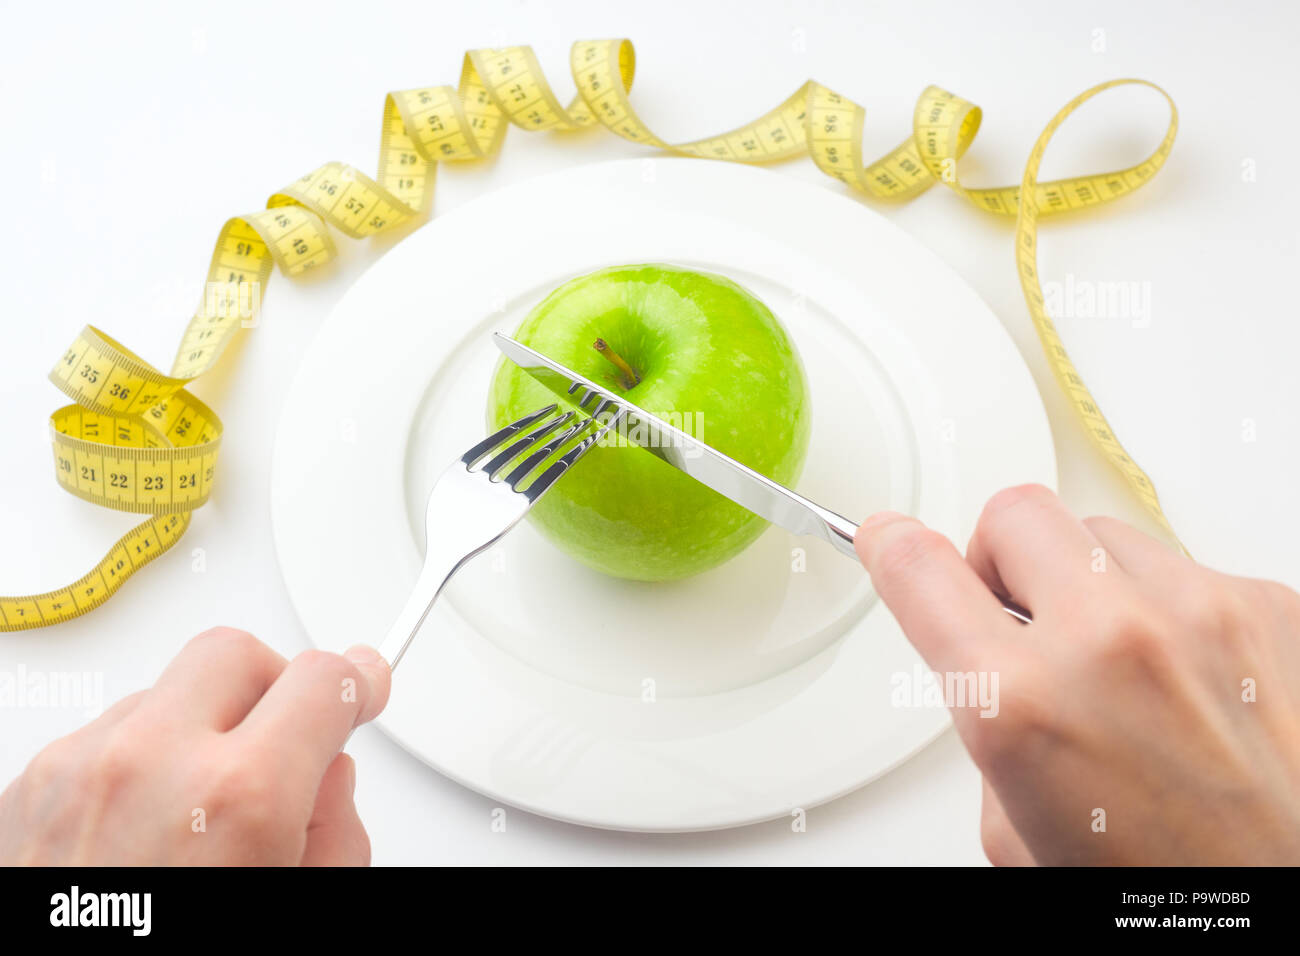 Diet concept, green apple on a white plate, yellow measuring tap Stock Photo